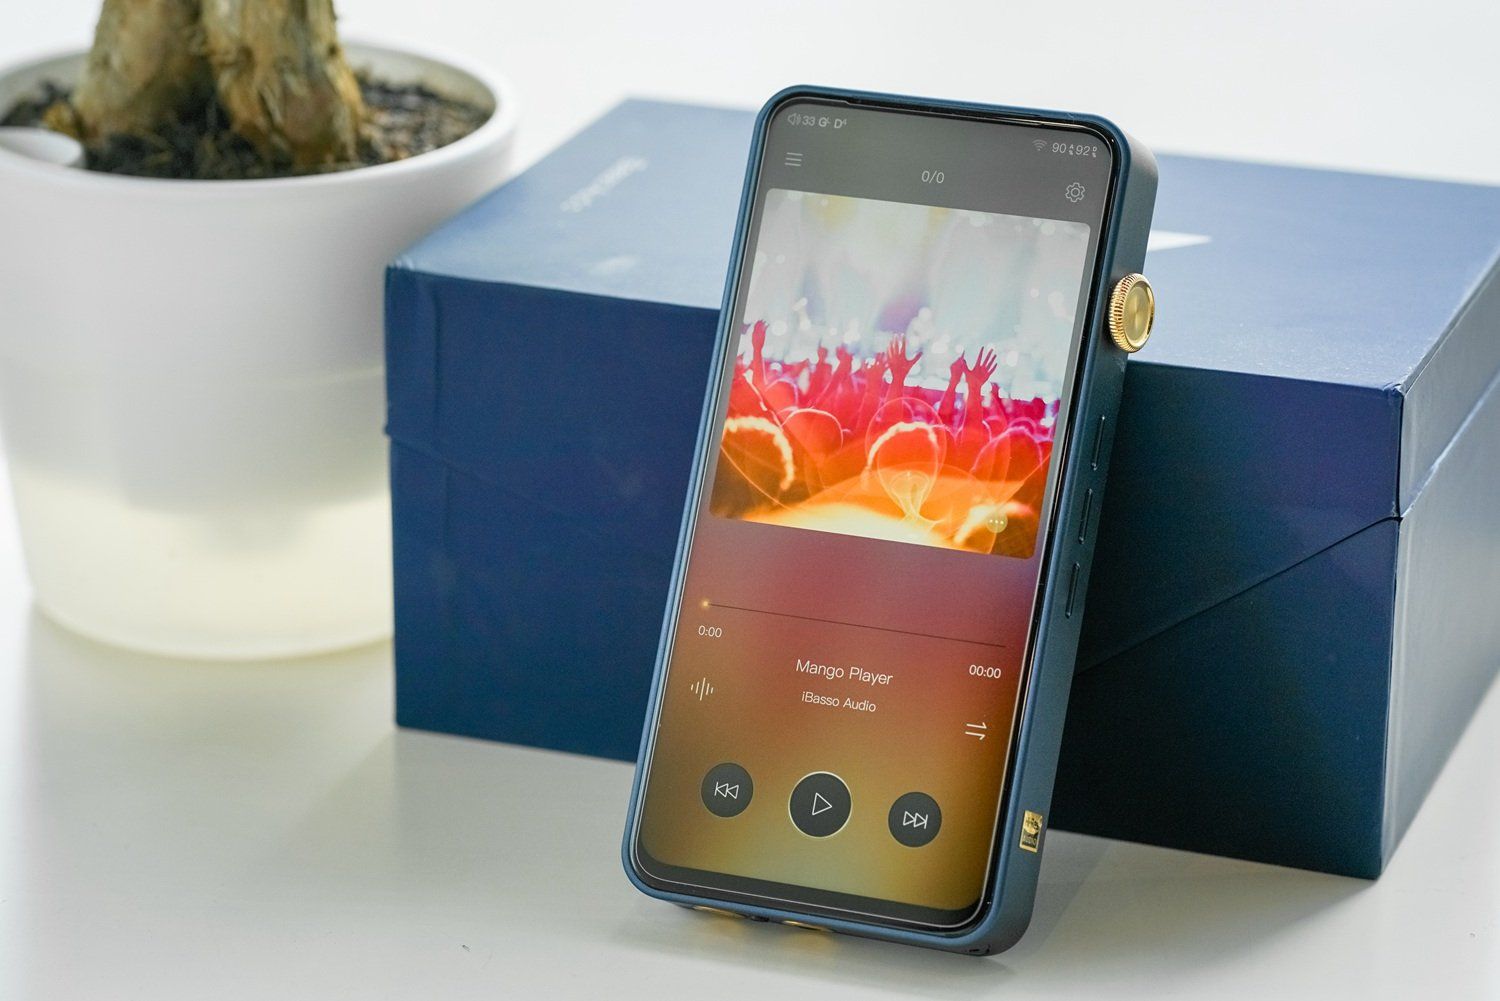 iBasso DX300 Quad-DAC Audio Player Unboxing & Initial Review